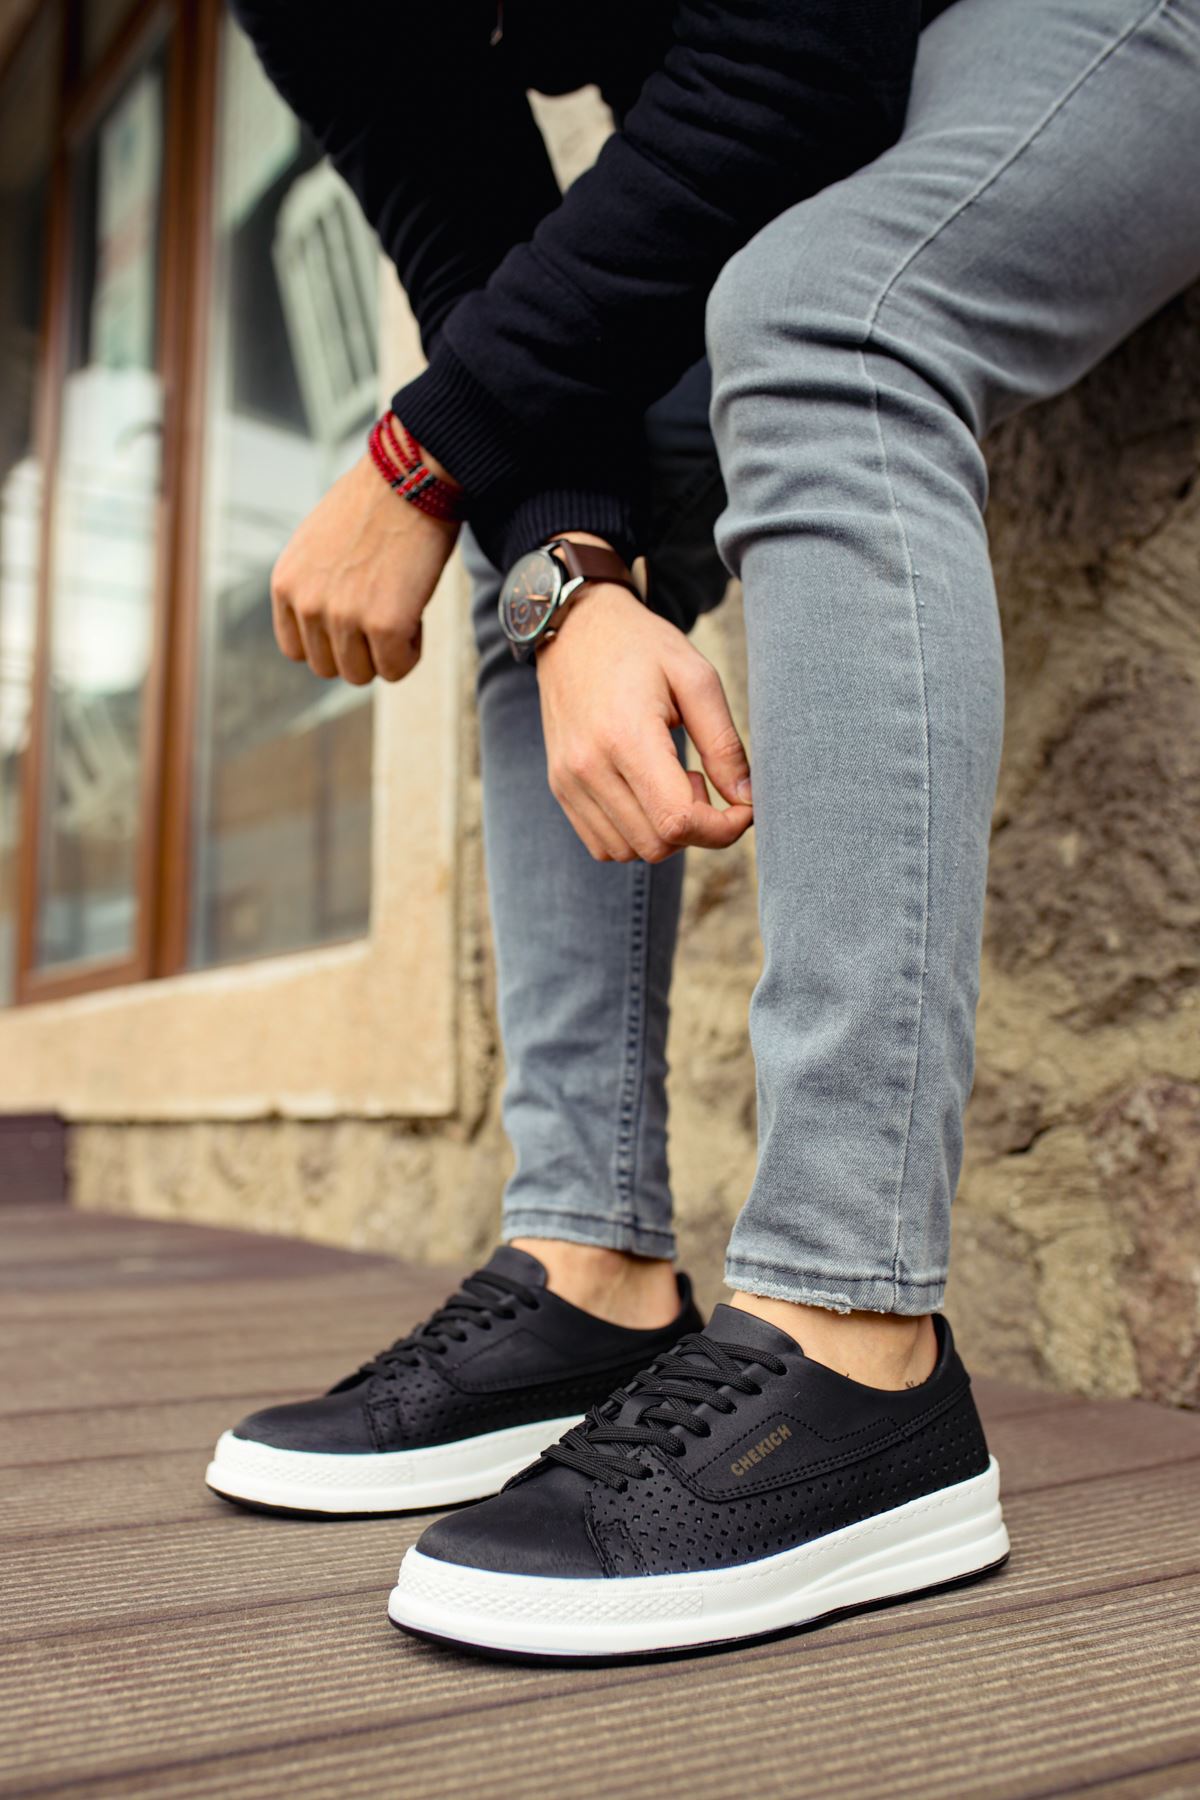 Chekich Shoes for Men's Black Color Faux Leather Sneakers Lace Up Spring and Fall Seasons 2021 New Casual Vulcanized Flexible Sewing Outsole Breathable Odorless Wedding Office Sport Suits Comfortable Formal CH043 V7